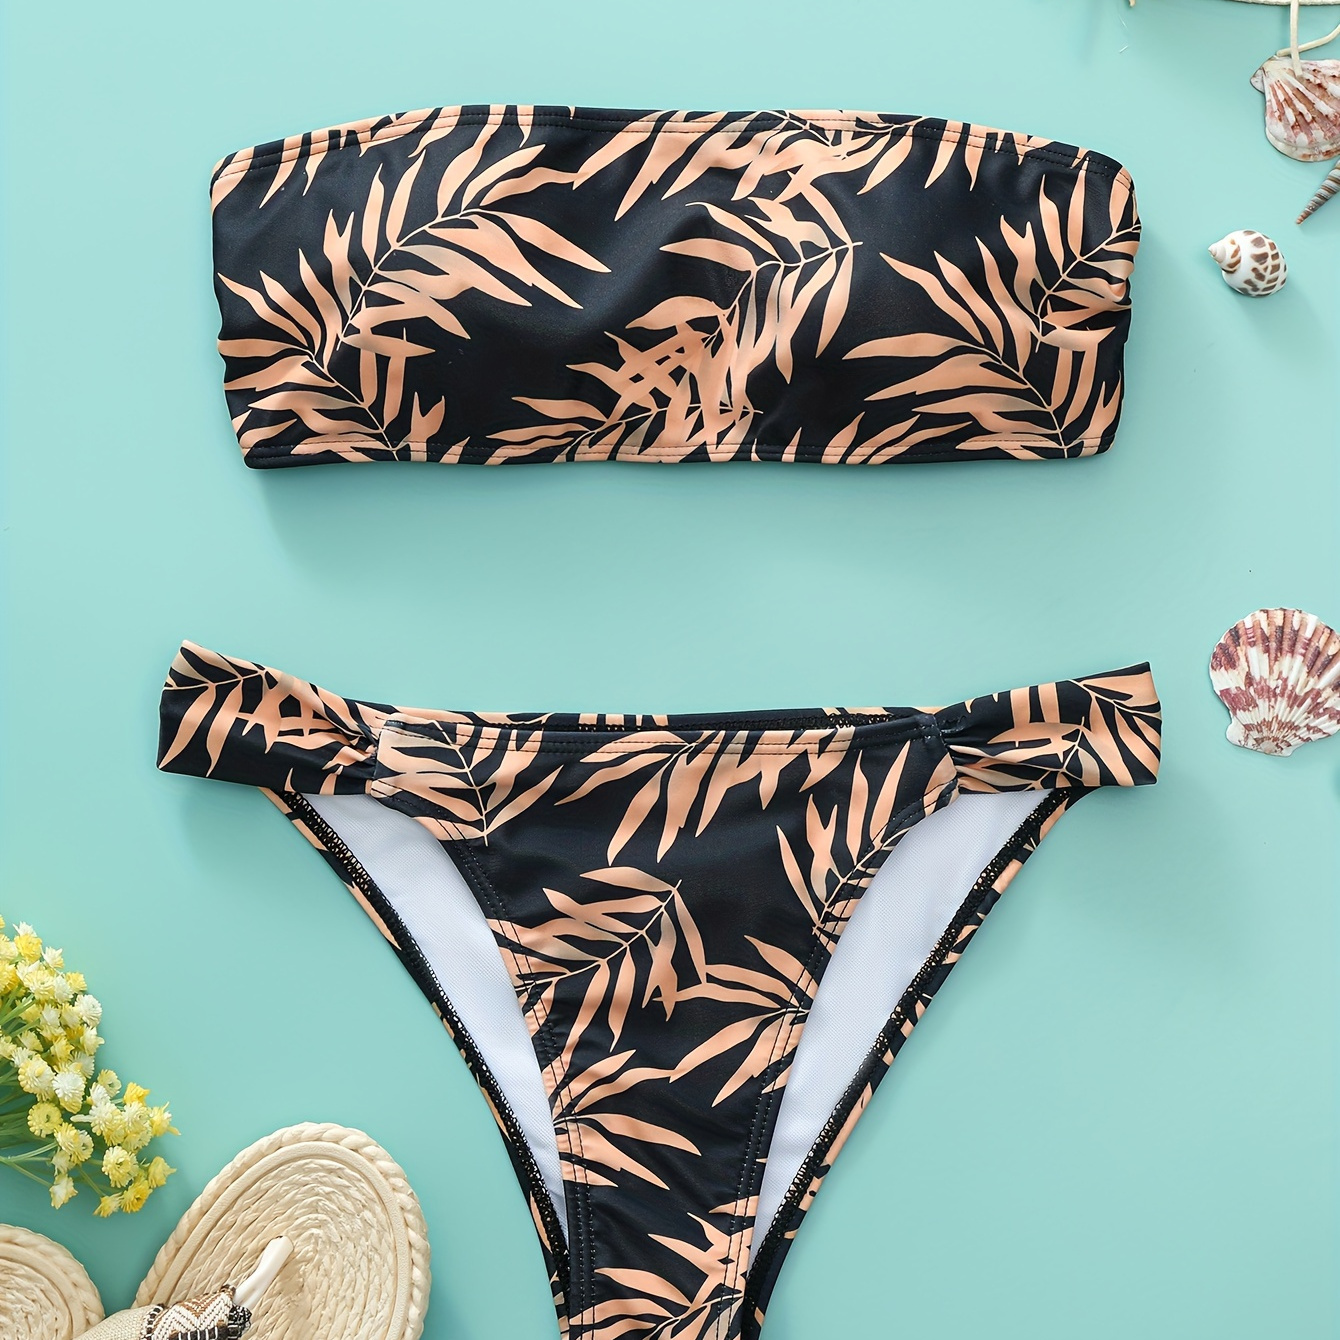 

Tropical Print Bikini Sets, Bandeau Off The Shoulder Strapless Tube Top High Cut Stretchy 2 Pieces Swimsuit, Women's Swimwear & Clothing